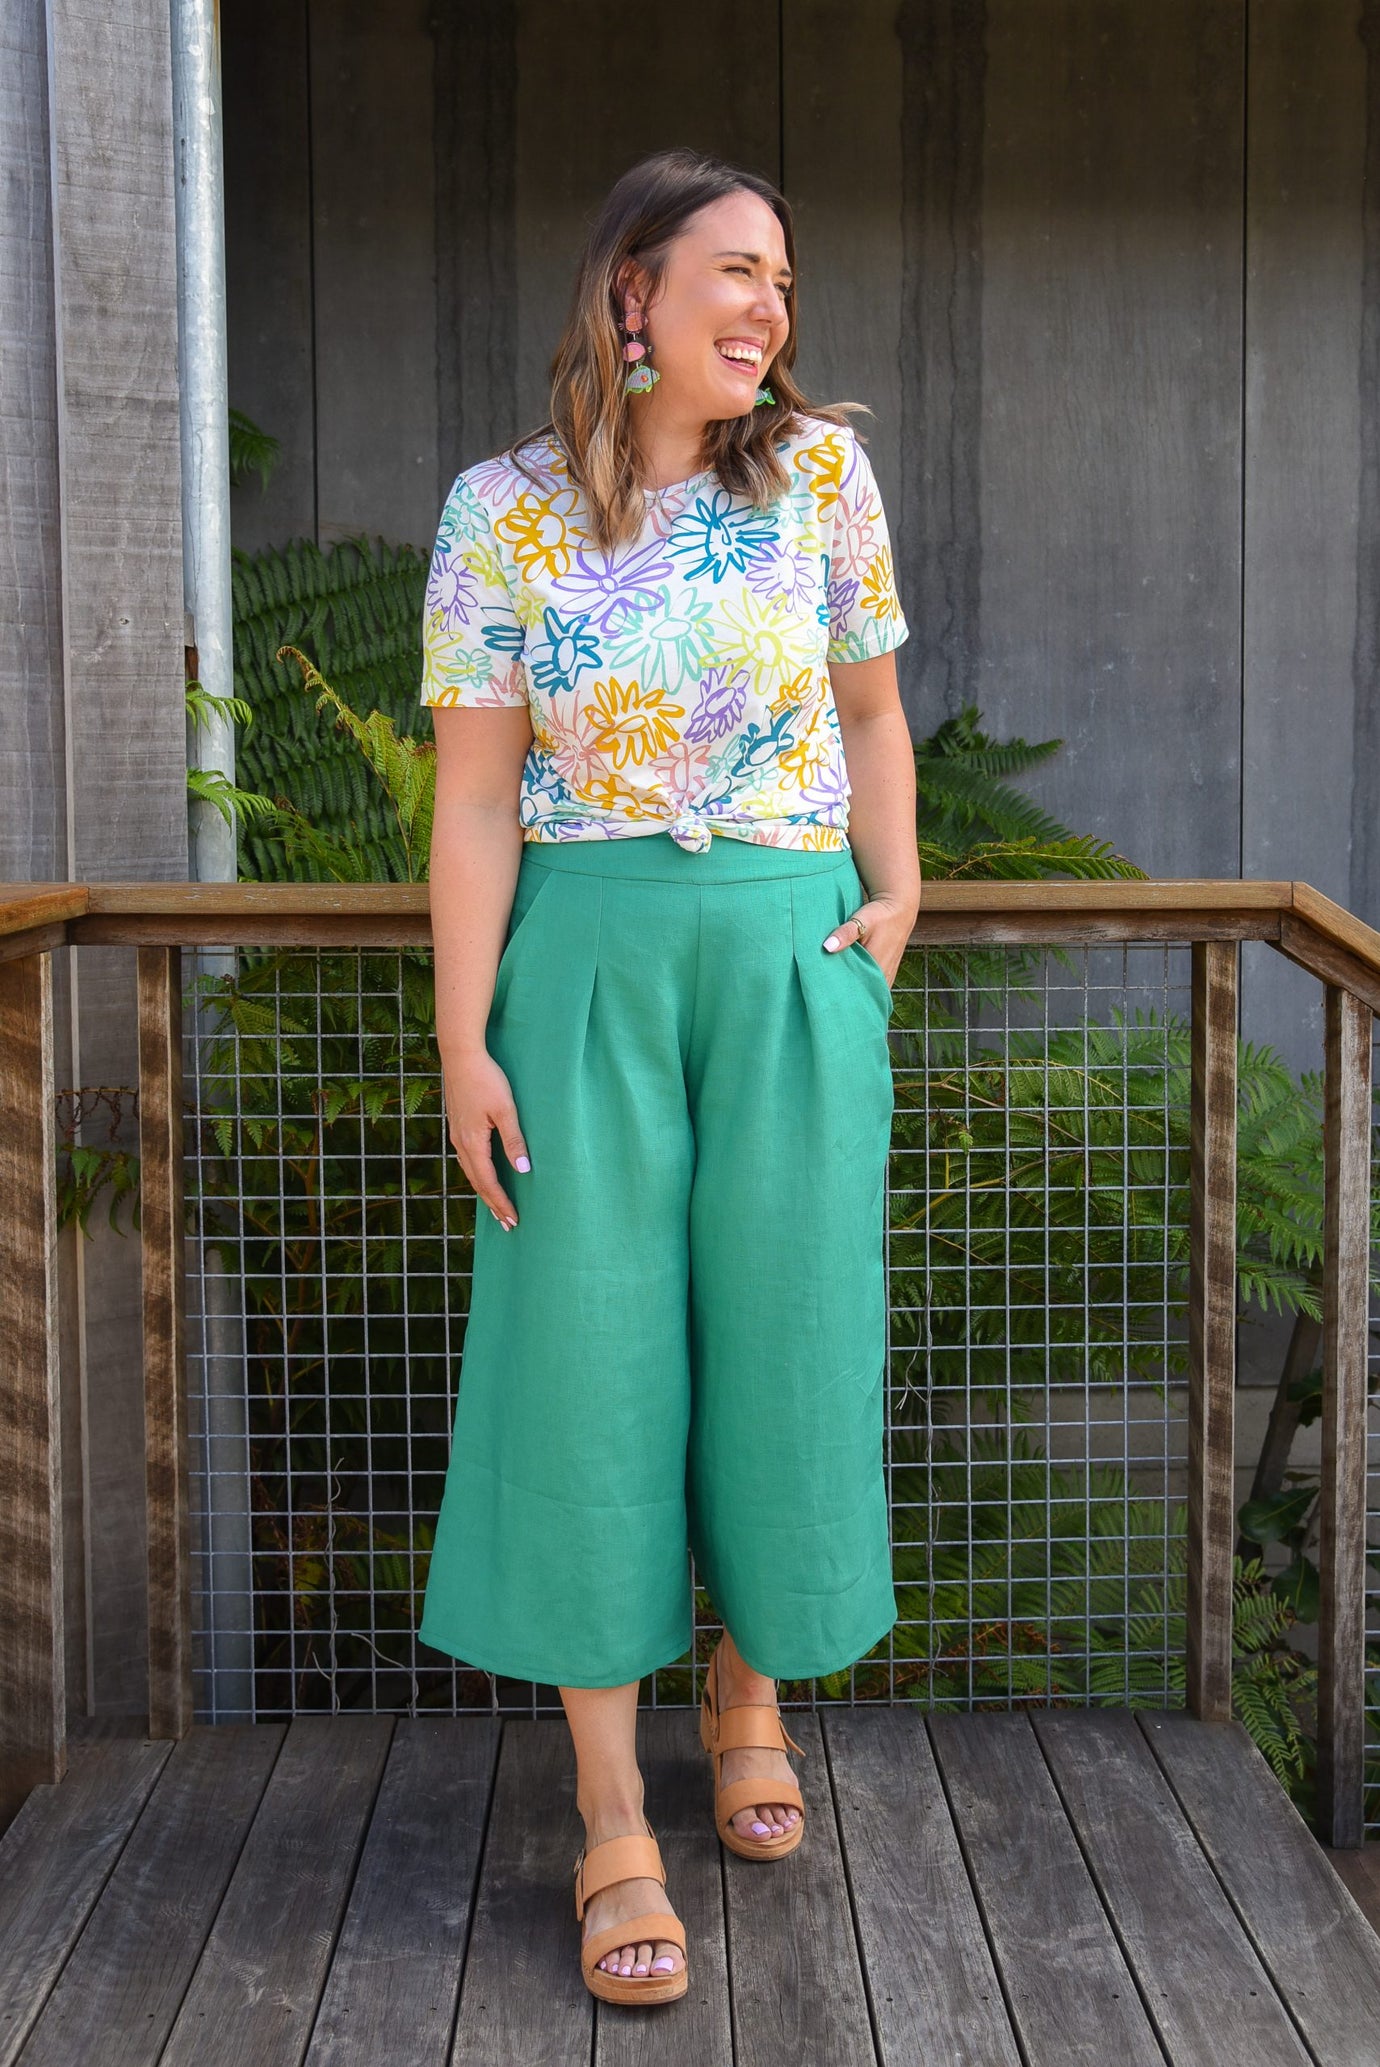 Women wearing the Carolina Culottes sewing pattern from Sew to Grow on The Fold Line. A culottes pattern made in rayon, linen/linen blends, cotton or chambray fabrics, featuring an elasticised back and flat front waistband, sits just above the hips, front